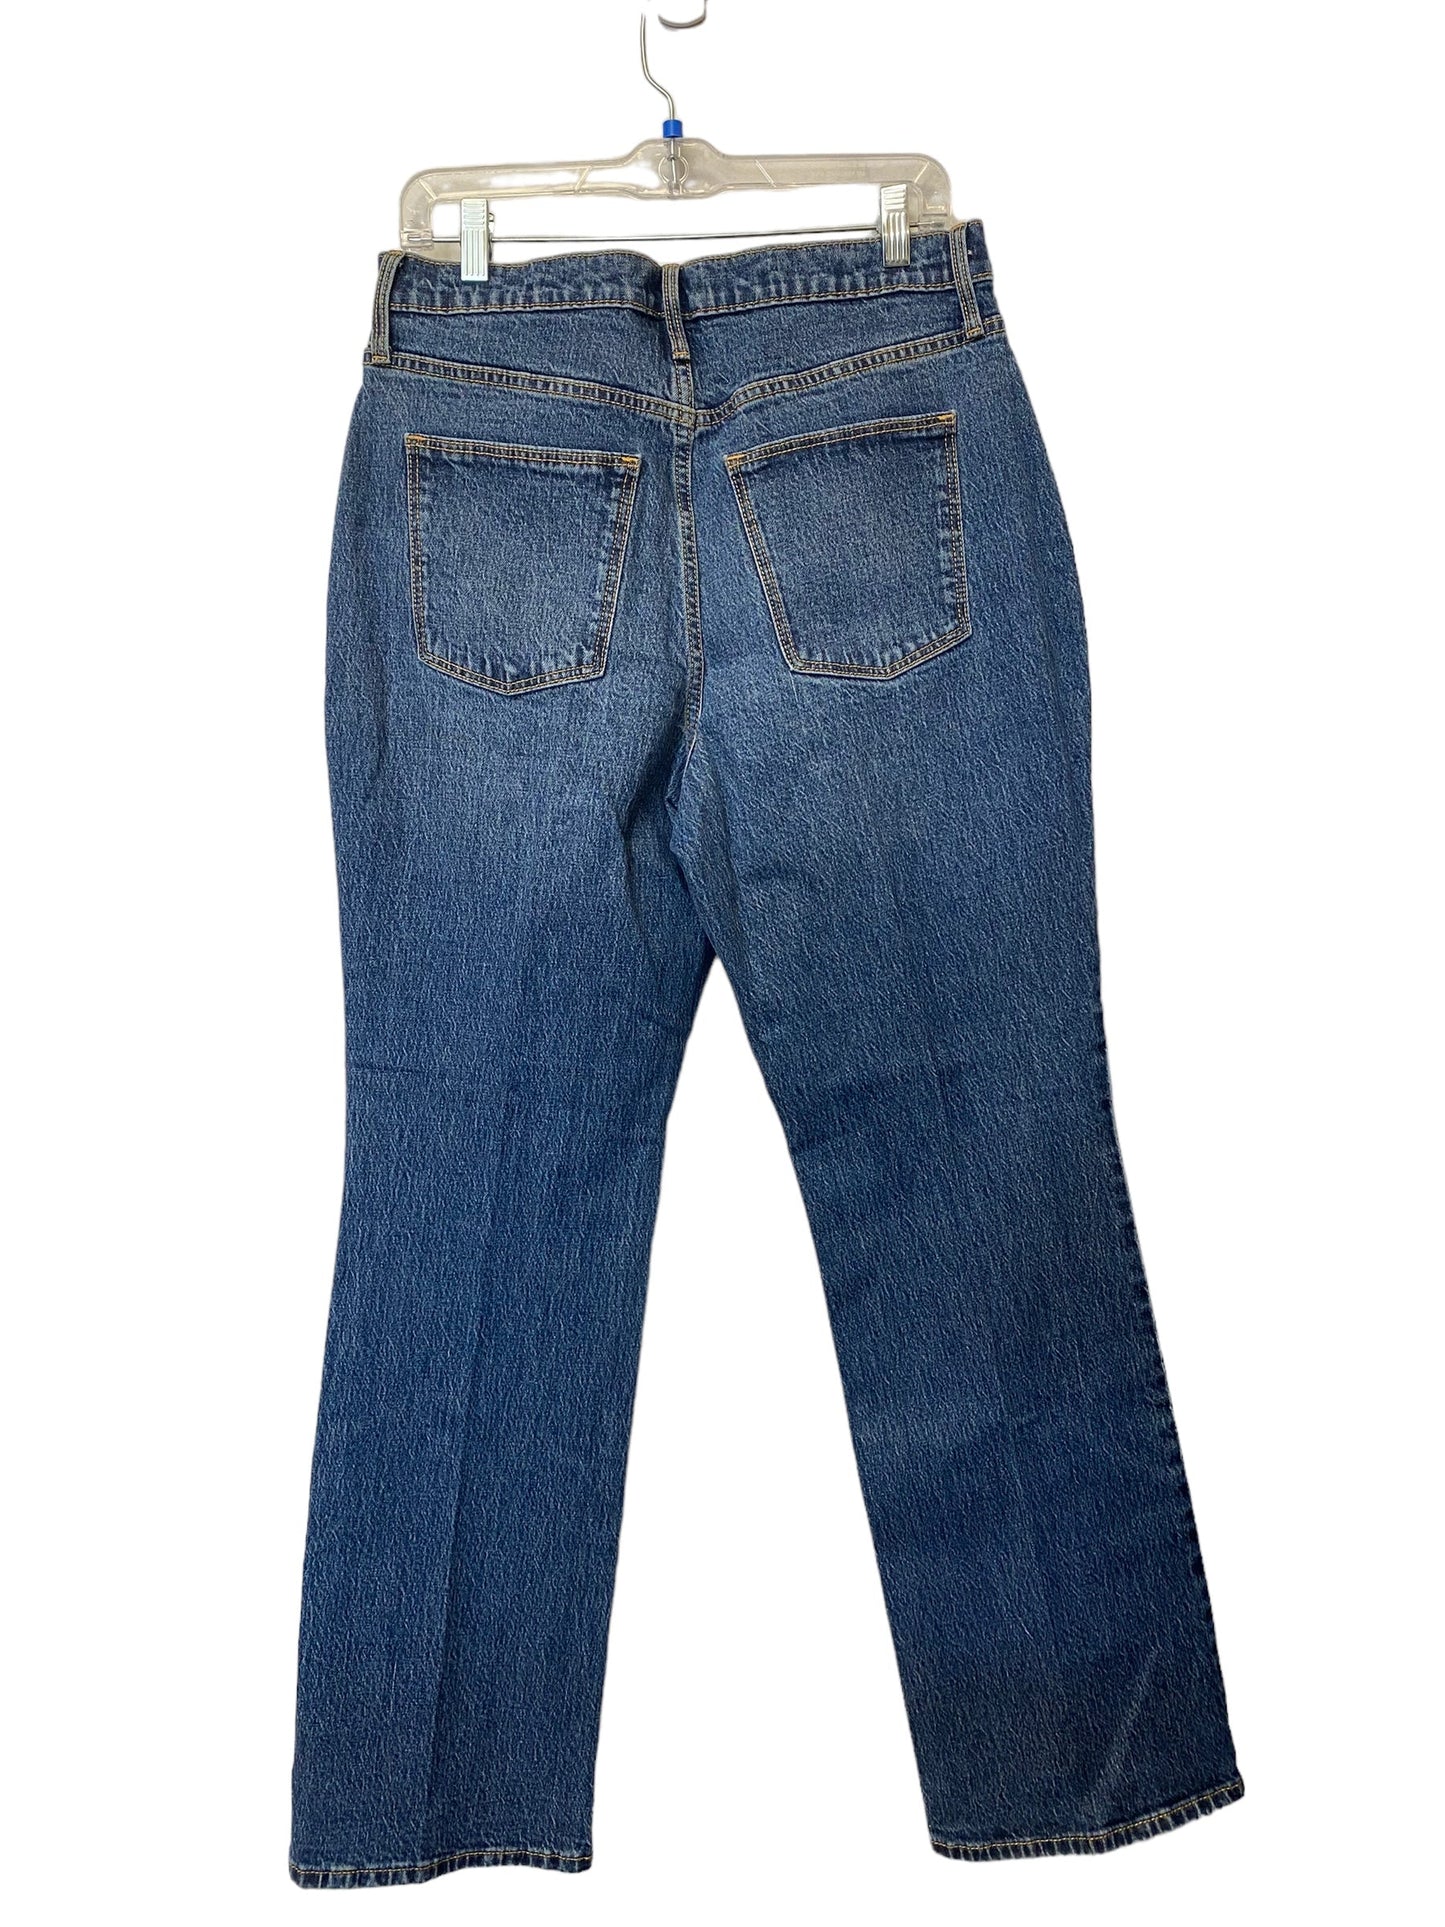 Jeans Flared By Universal Thread  Size: 10